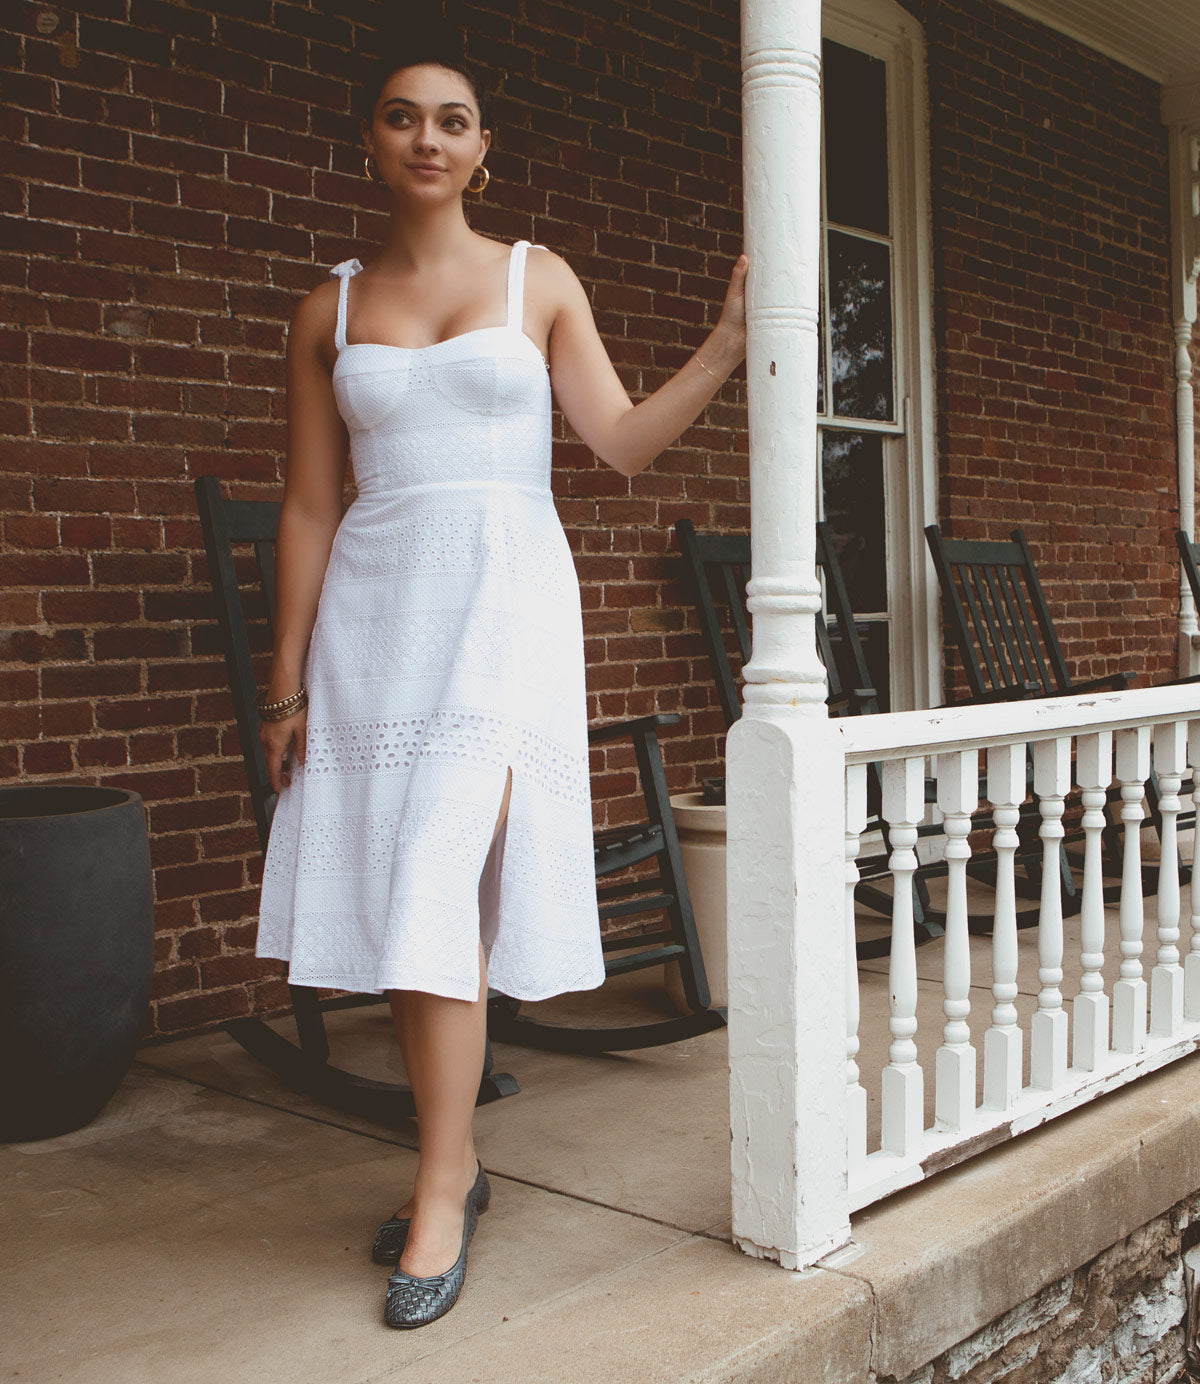 
                  
                    A woman in a white dress stands on the porch of a brick building, holding a white porch column. There are rocking chairs behind her, showcasing the intentional craftsmanship of the hand-woven leather cushions that invite relaxation, featuring Roan's Business model.
                  
                